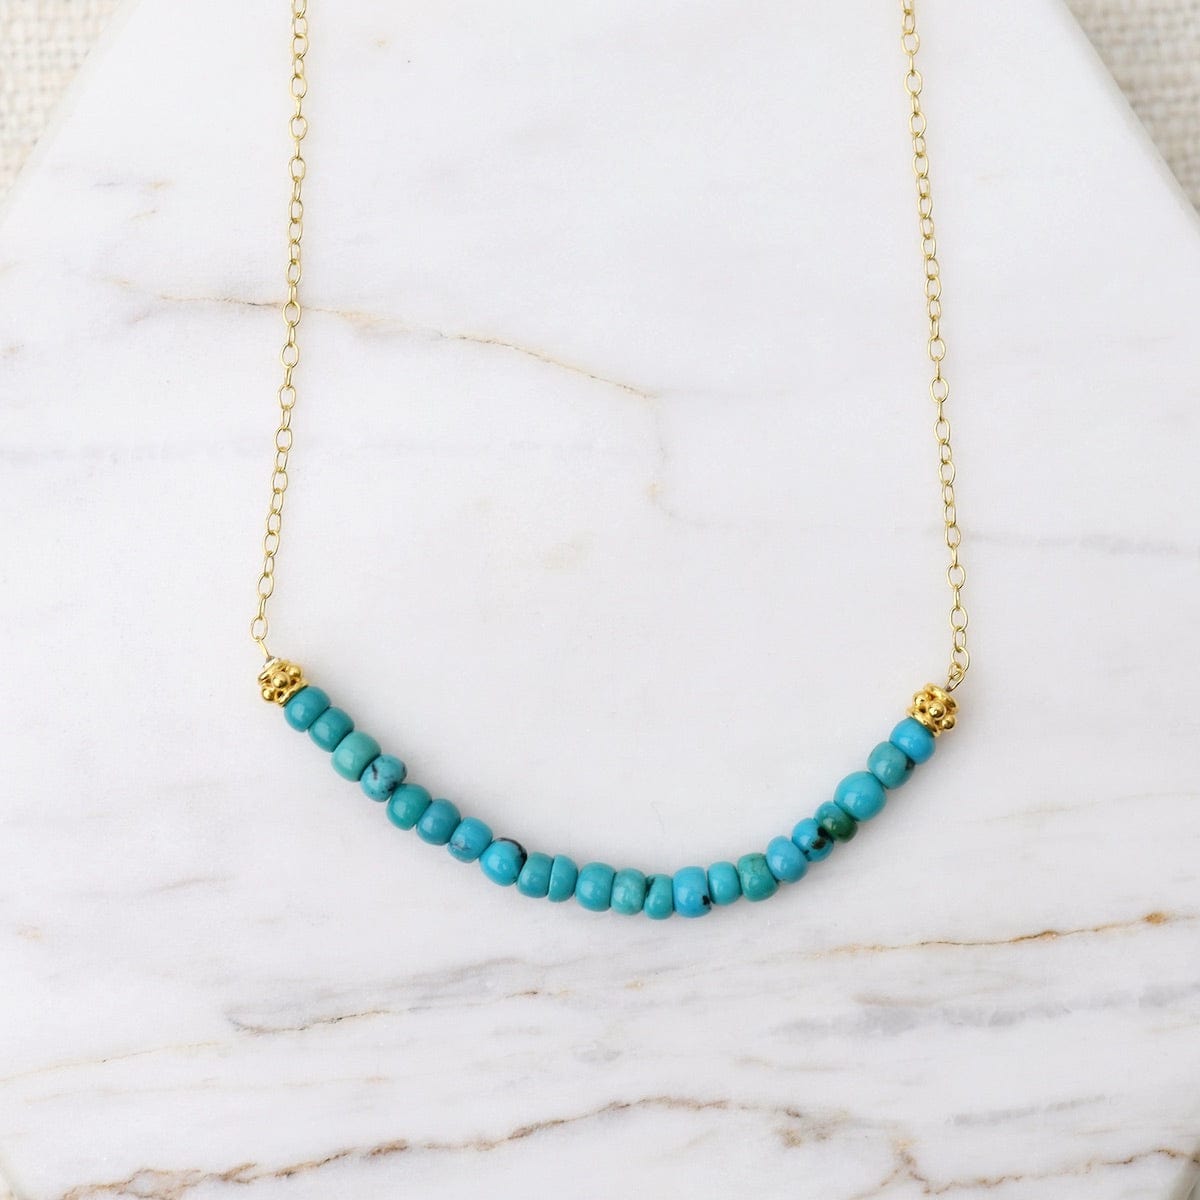 NKL-GF Gold Filled Chain with Gemstone Arc - Turquoise